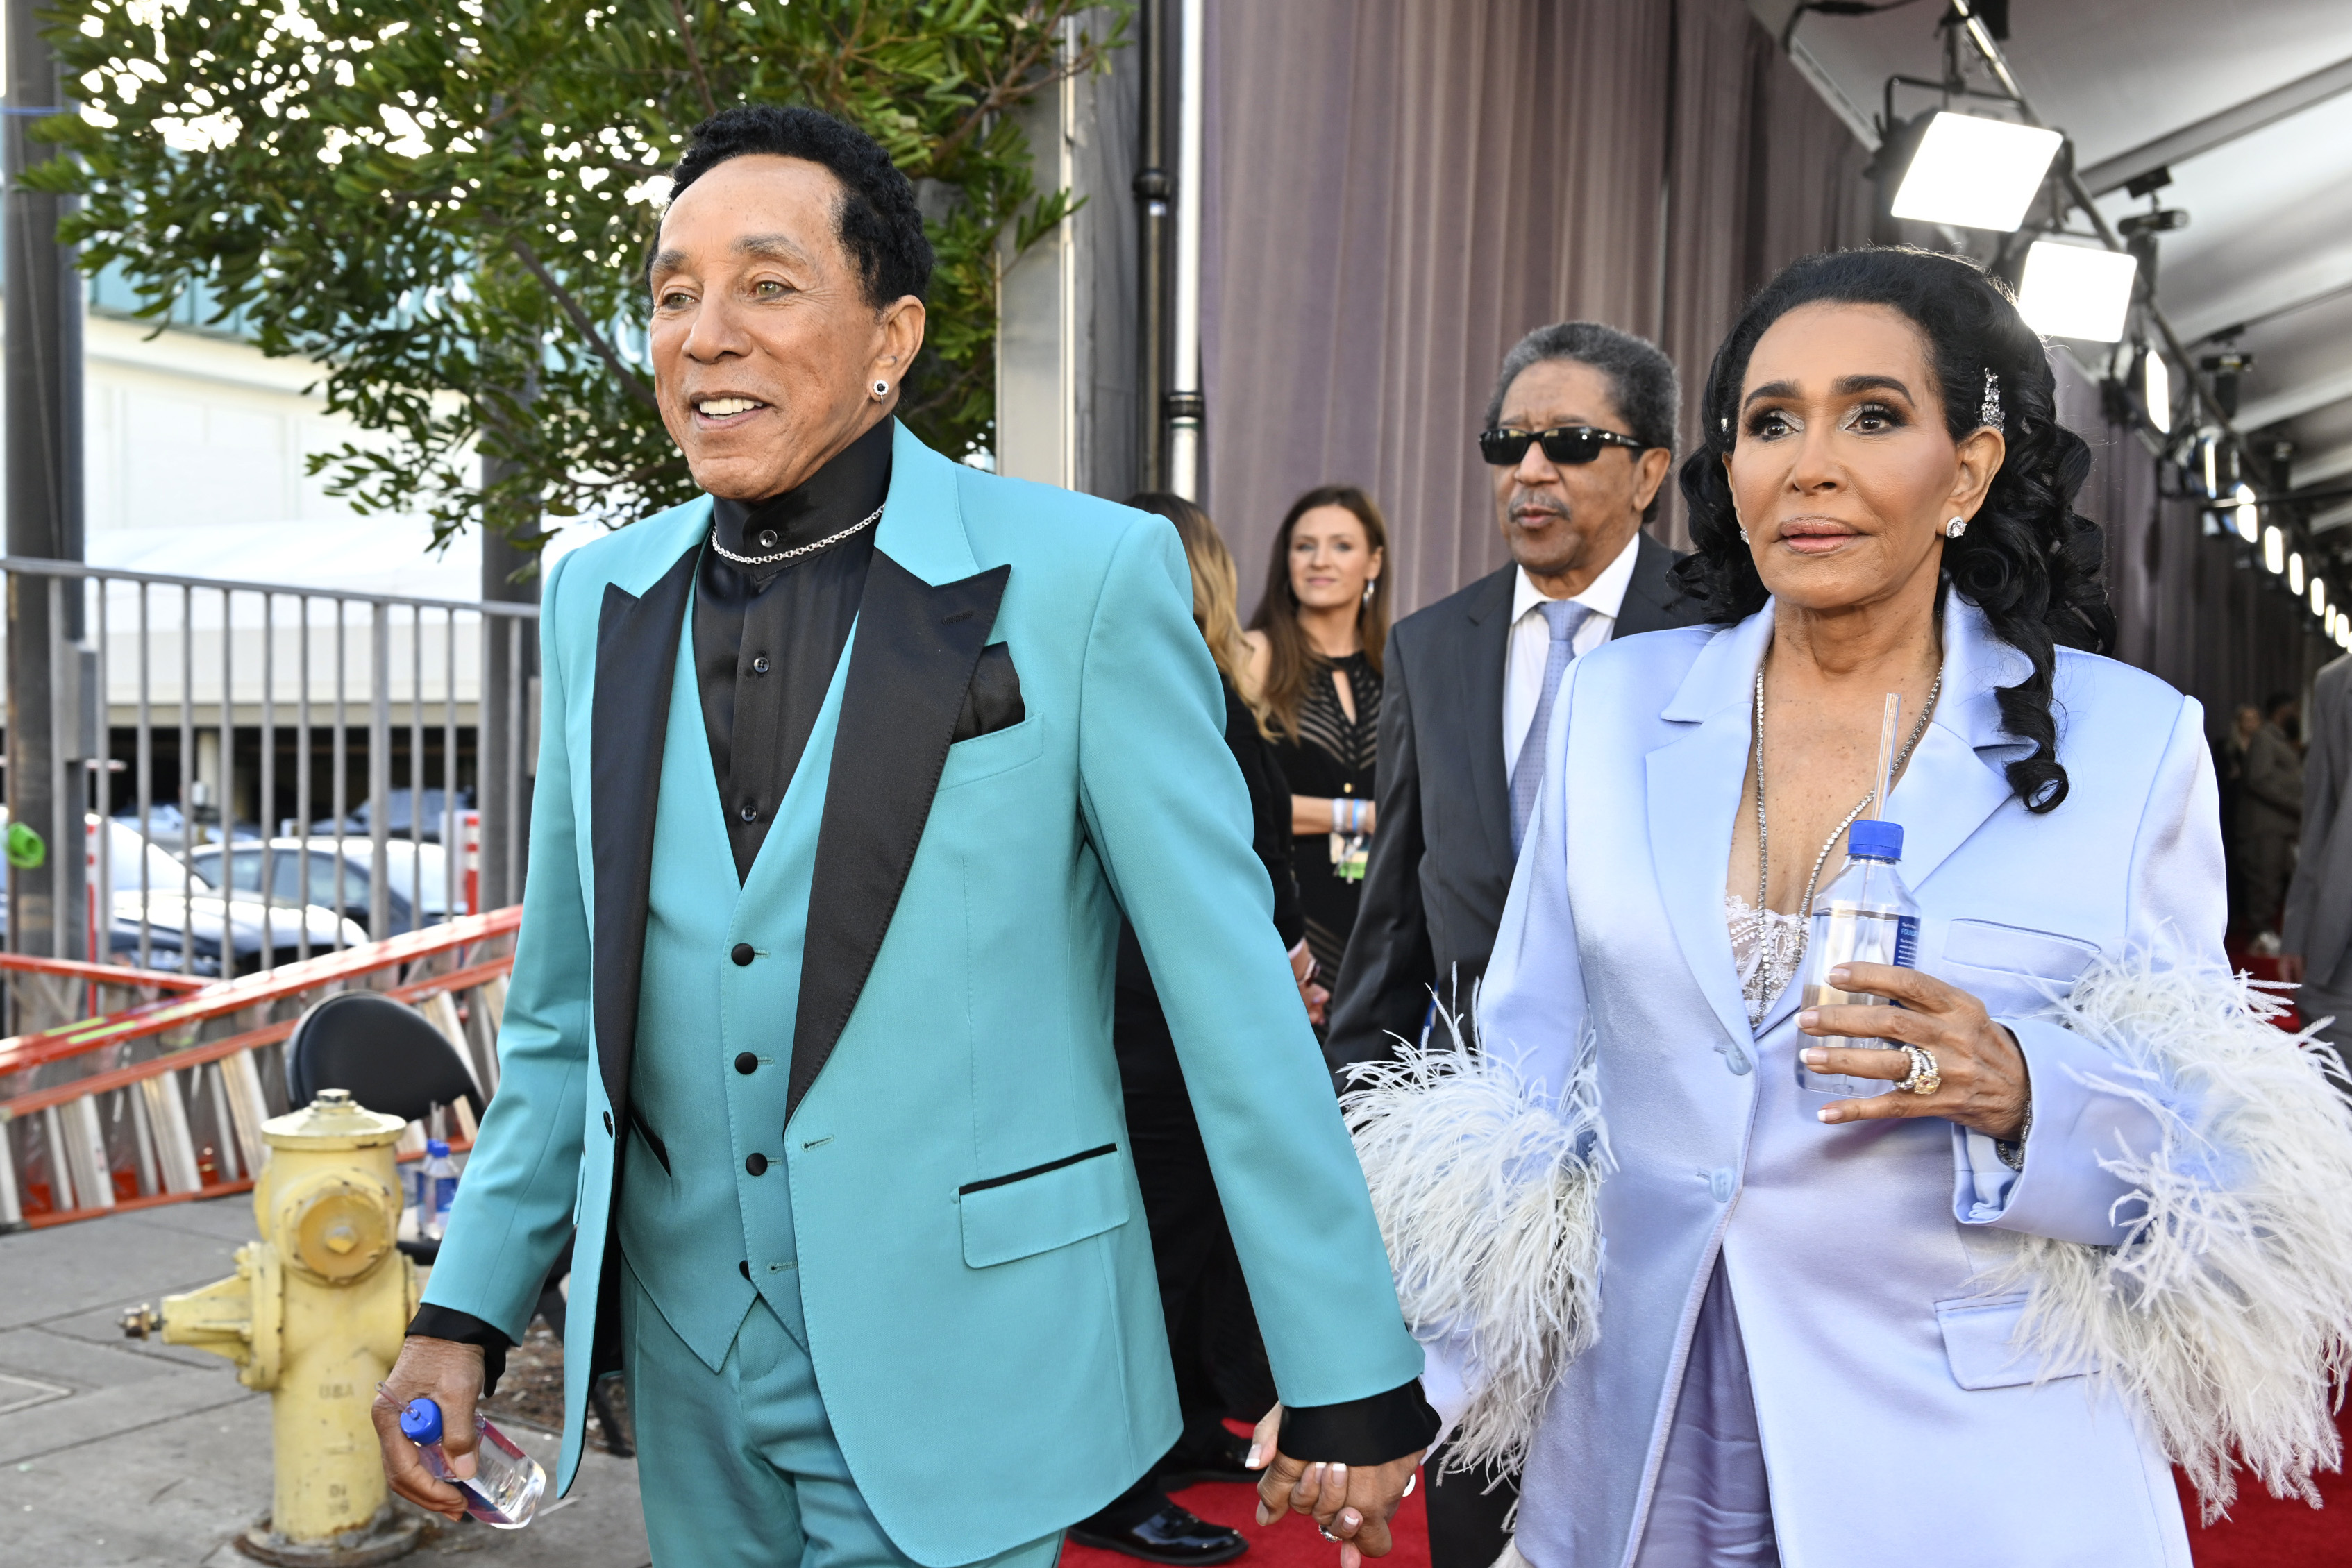 Smokey Robinson and Frances Glandney attend the 65th GRAMMY Awards with FIJI Water at the 65th GRAMMY Awards on, February 5, 2023, in Los Angeles, California. | Source: Getty Images